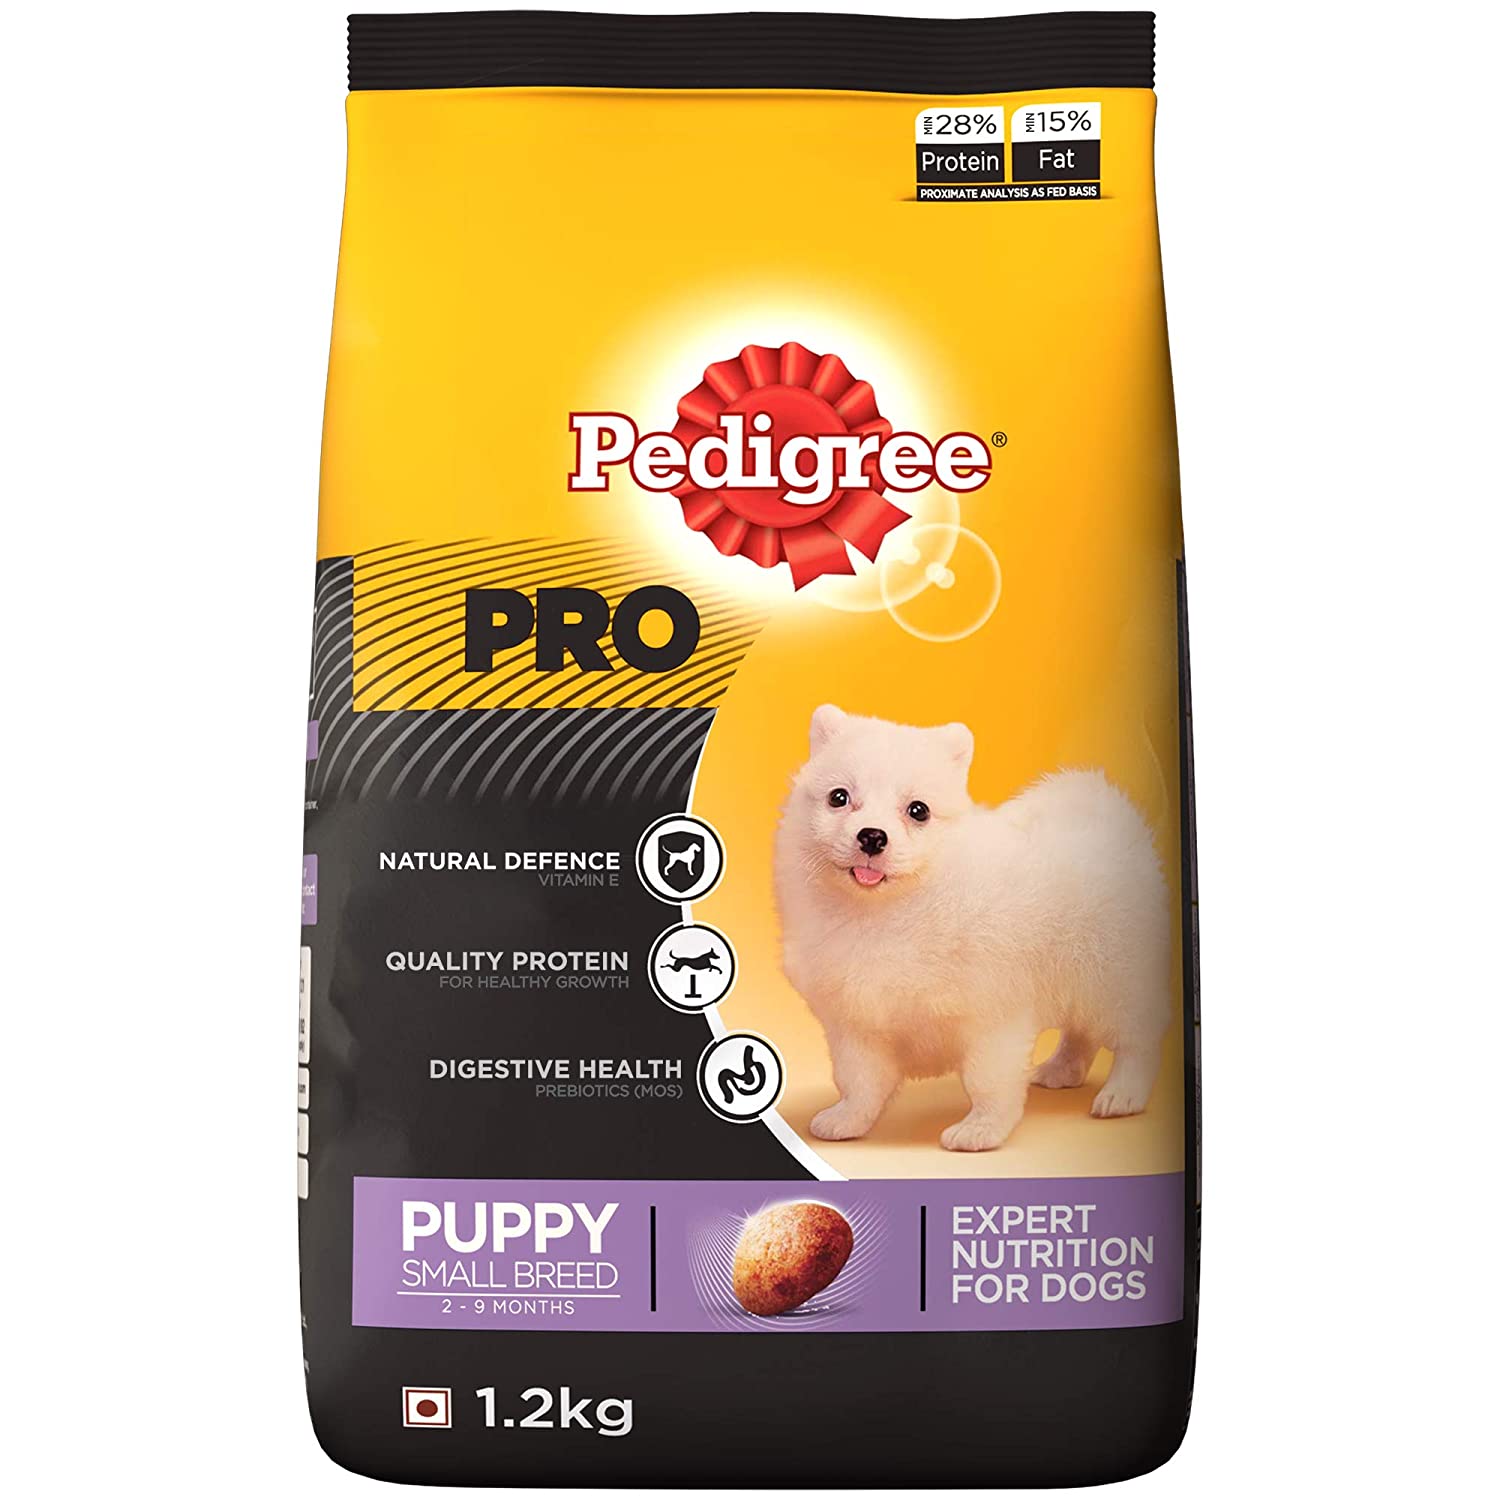 Buy Pedigree Pro Dog Food for Small Breed Puppies 1.2kg Online